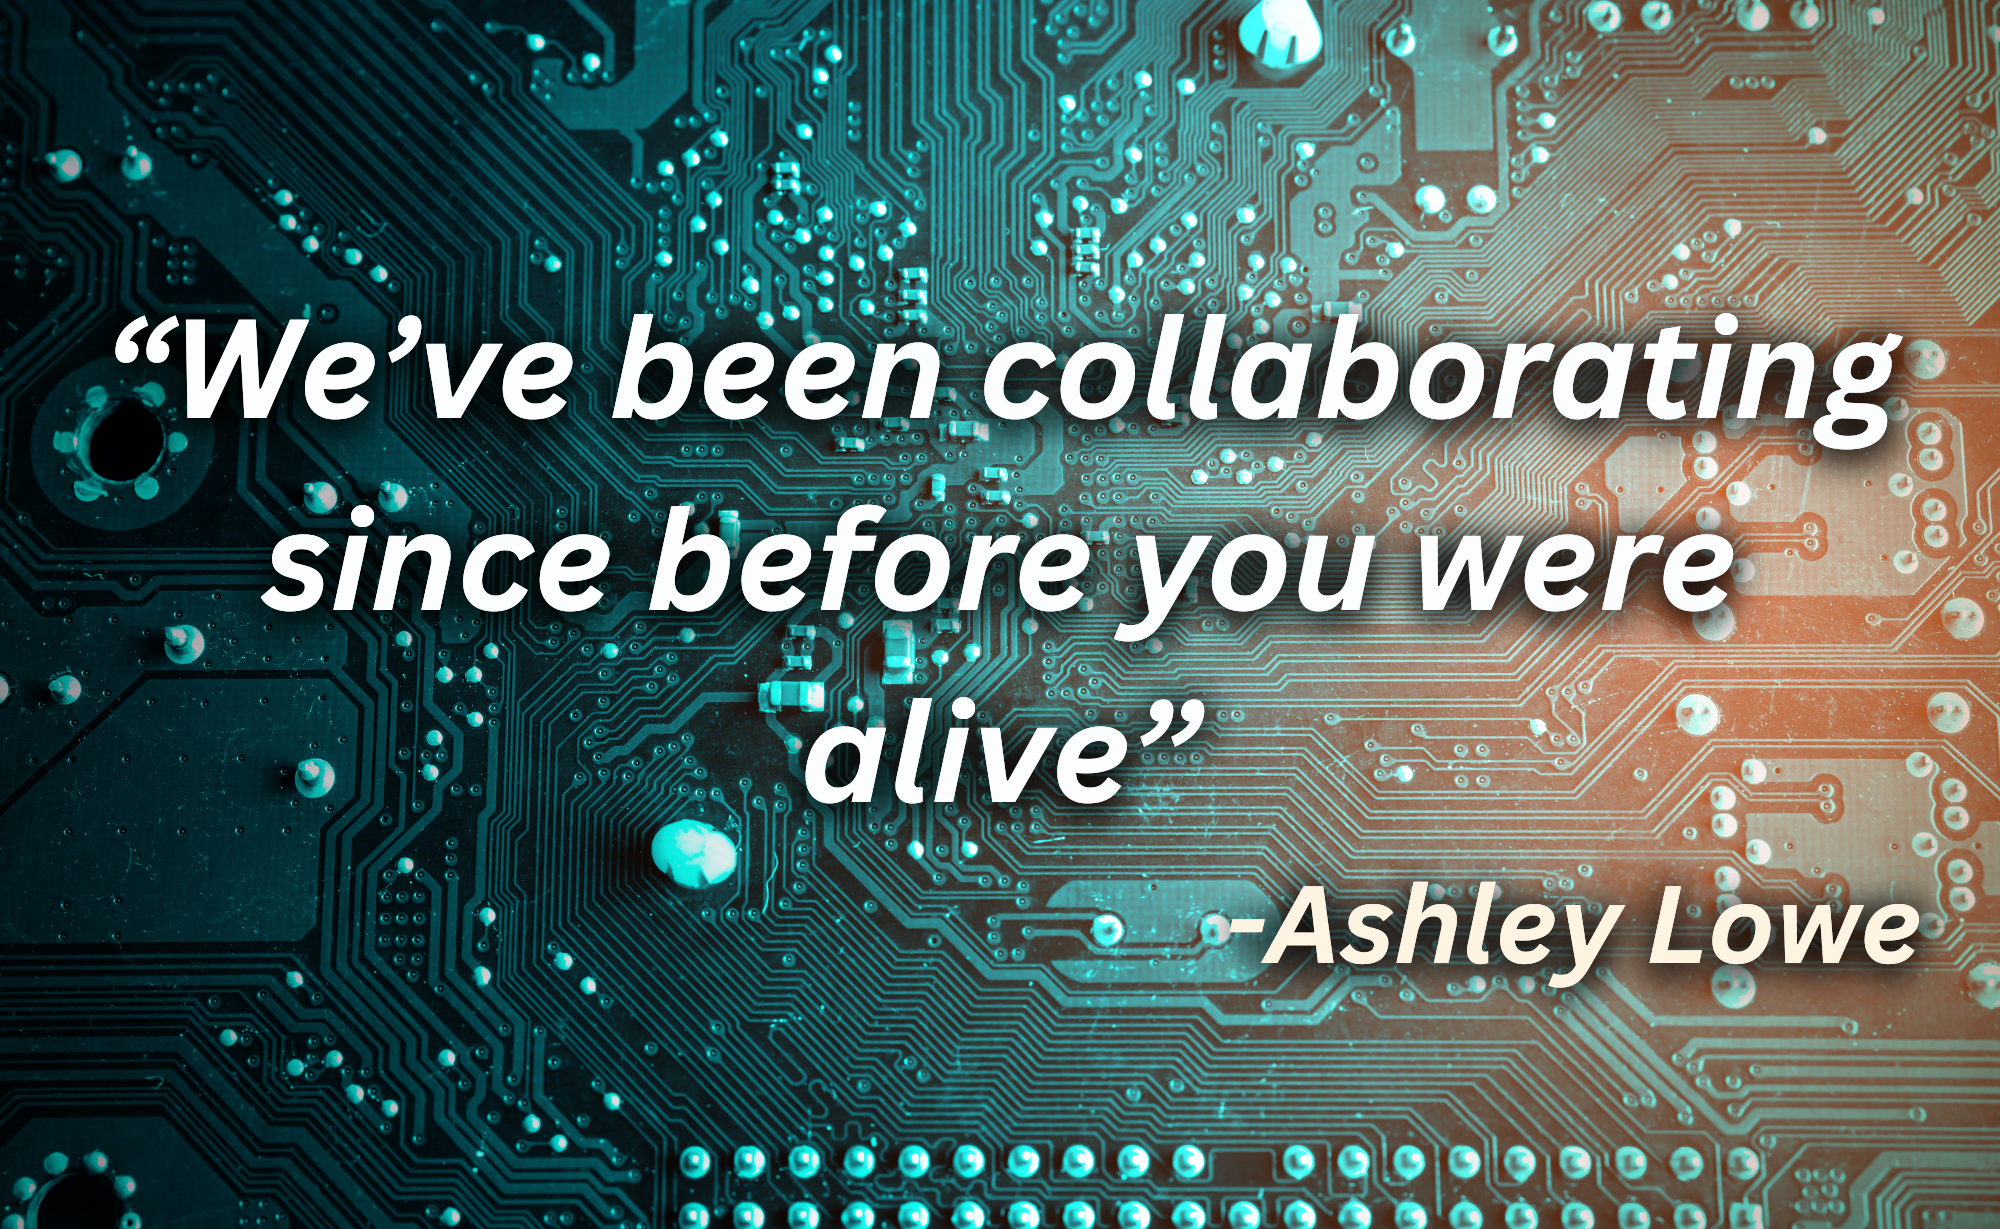 "We've been collaborating before you were alive" - Ashley Lowe